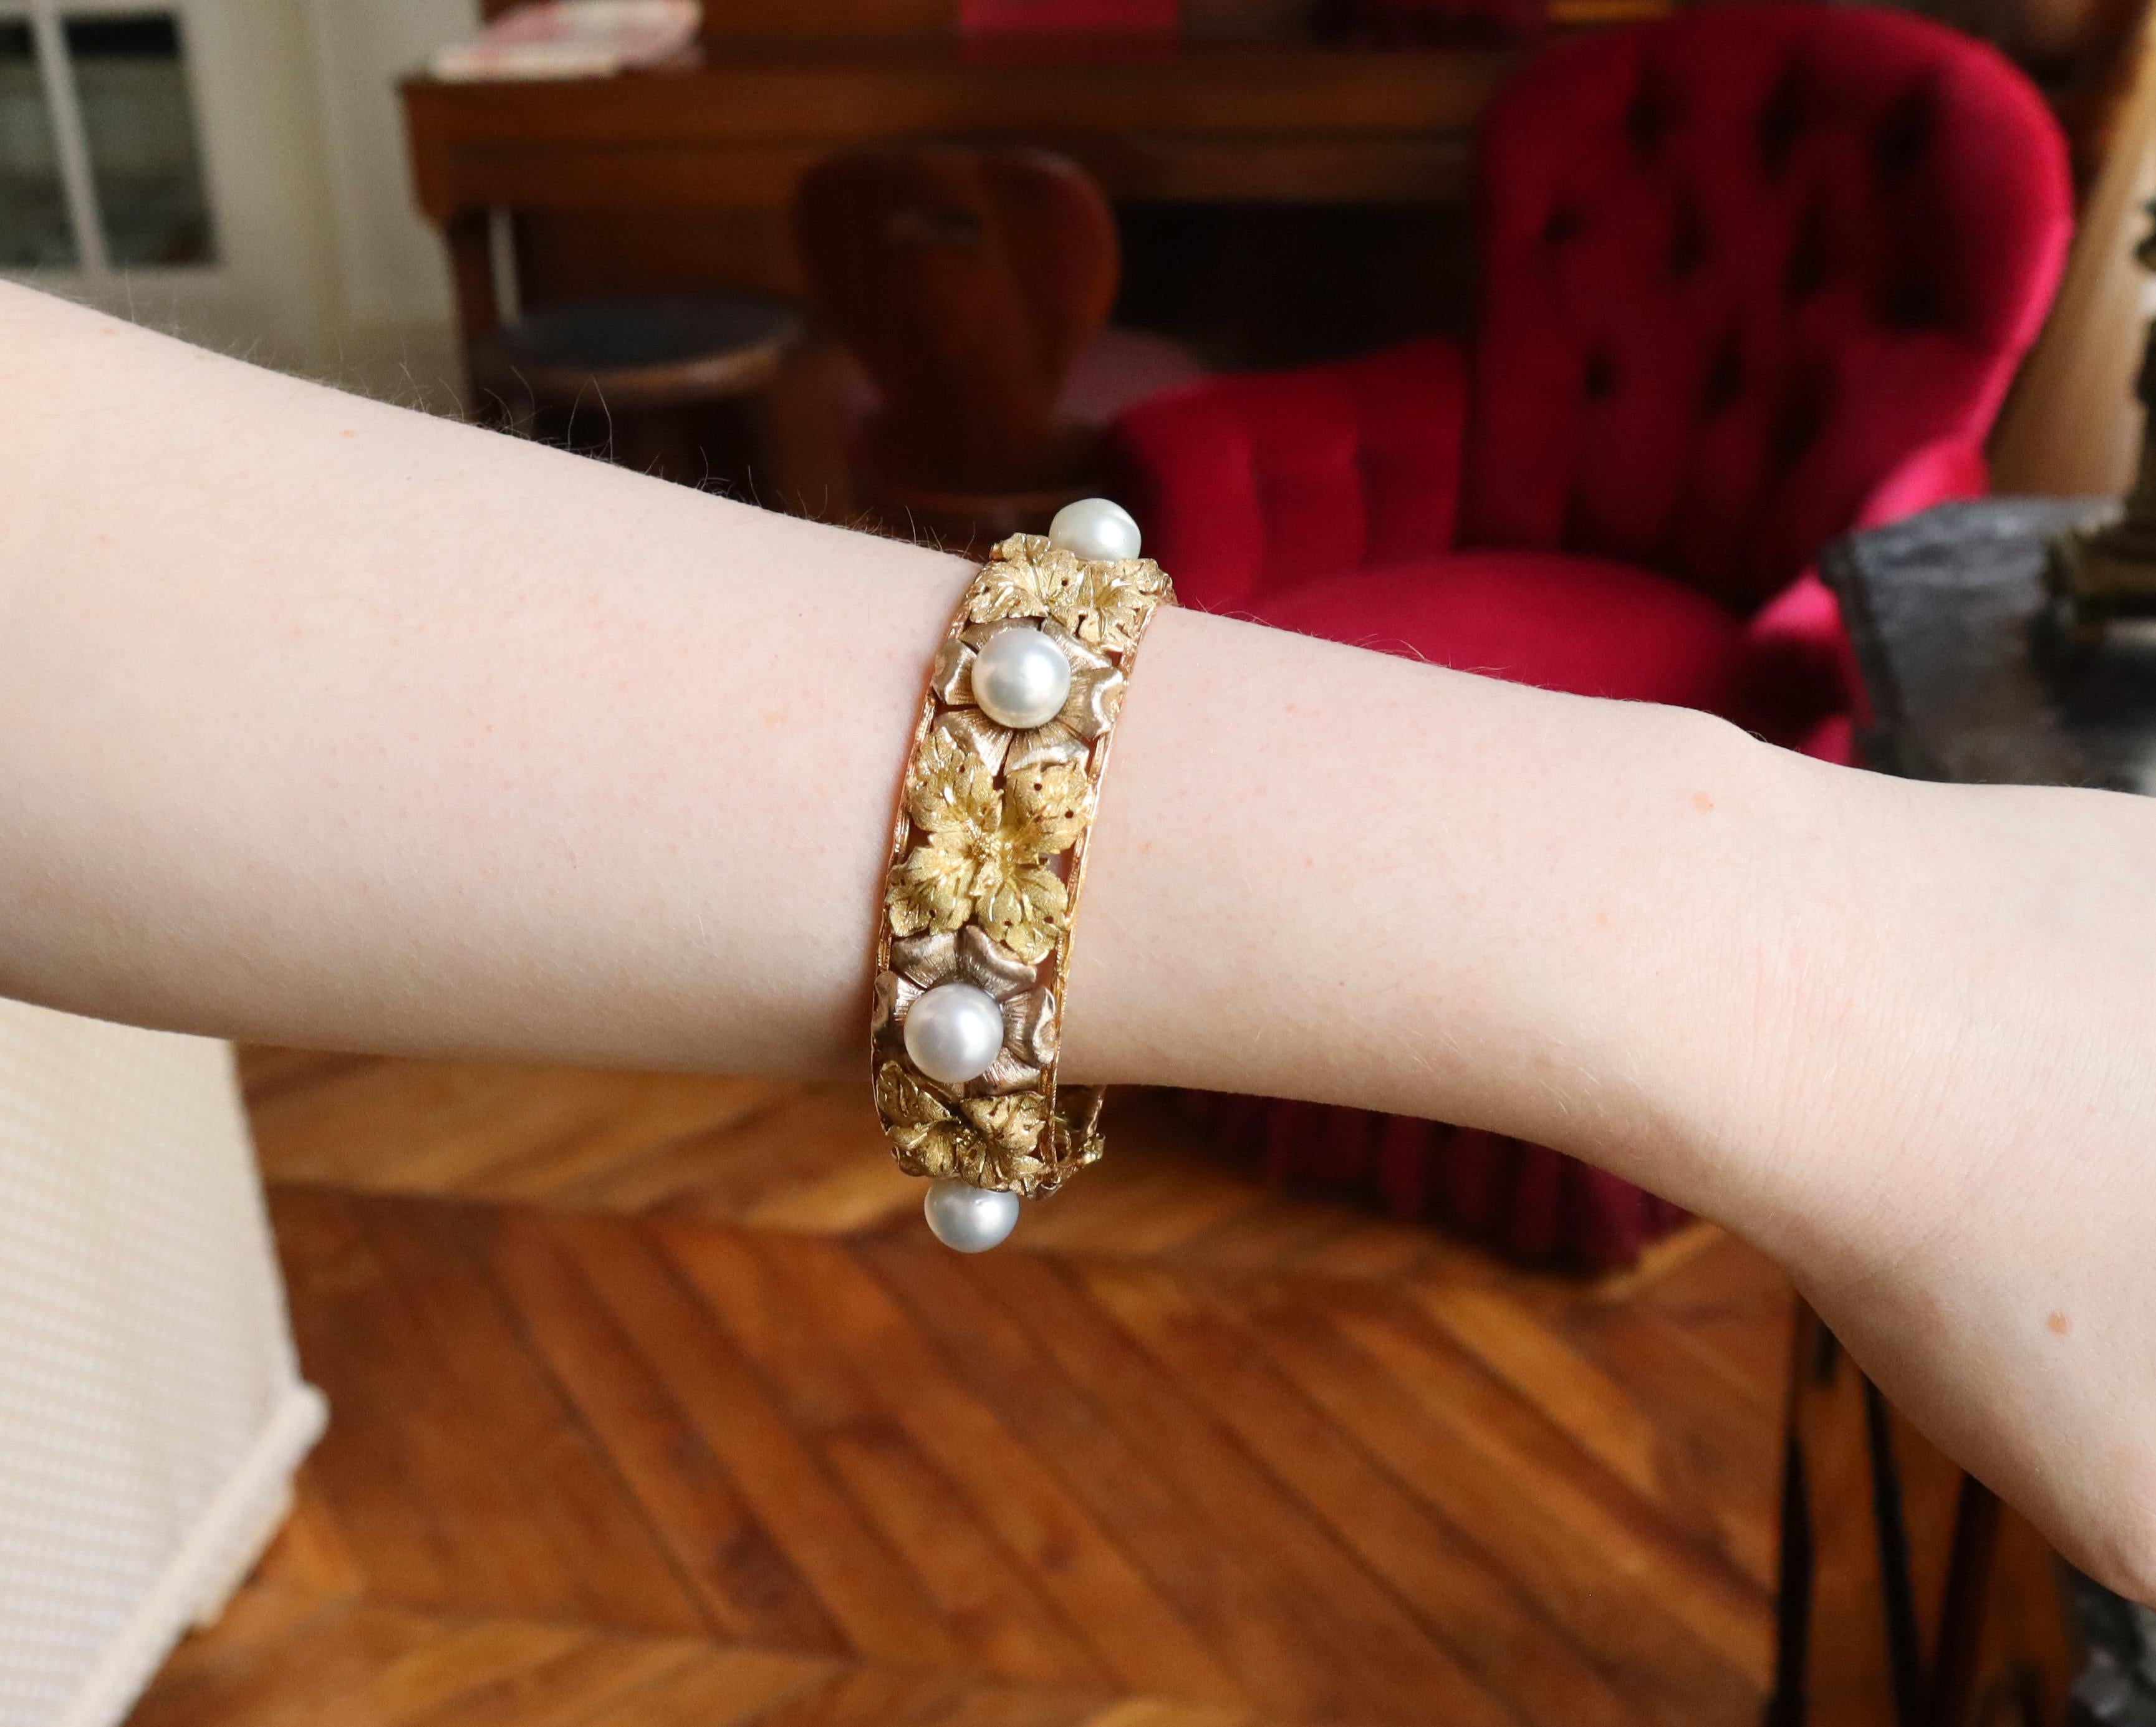 BUCCELLATI Bracelet in Three Golds : yellow Gold, white Gold, pink Gold with Leaf Motifs with 6 gray Pearls of about 1 cm Diameter.
Bracelet Adorned with chased and yellow Gold Flowers, alternated with Amati chiseled grey Gold Flowers punctuated